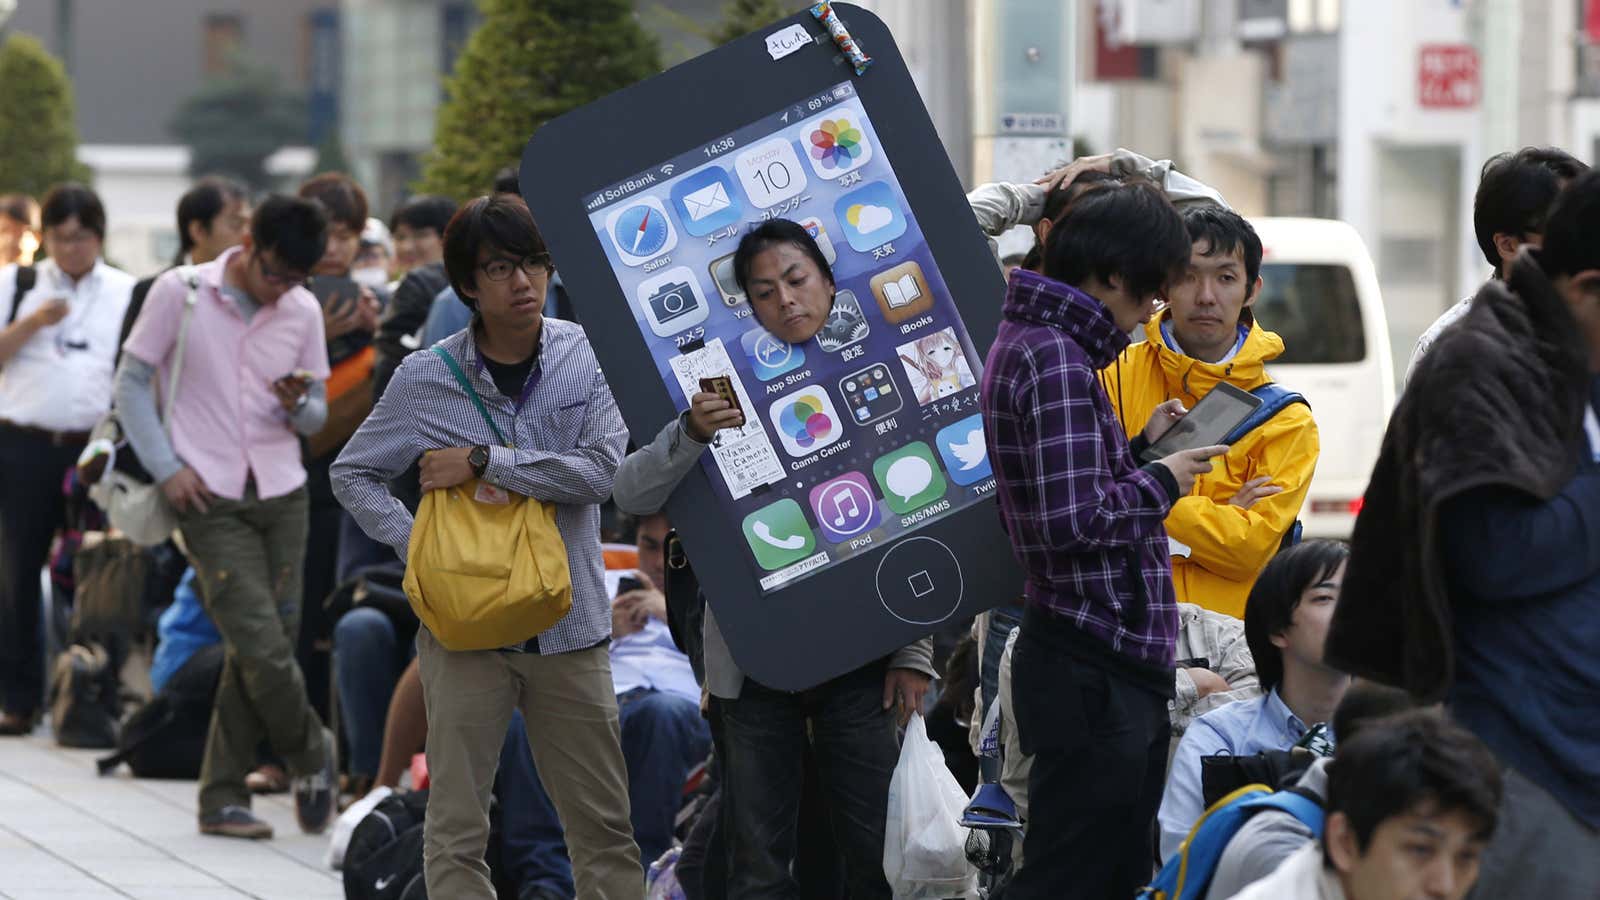 The iPhone is big in Japan.